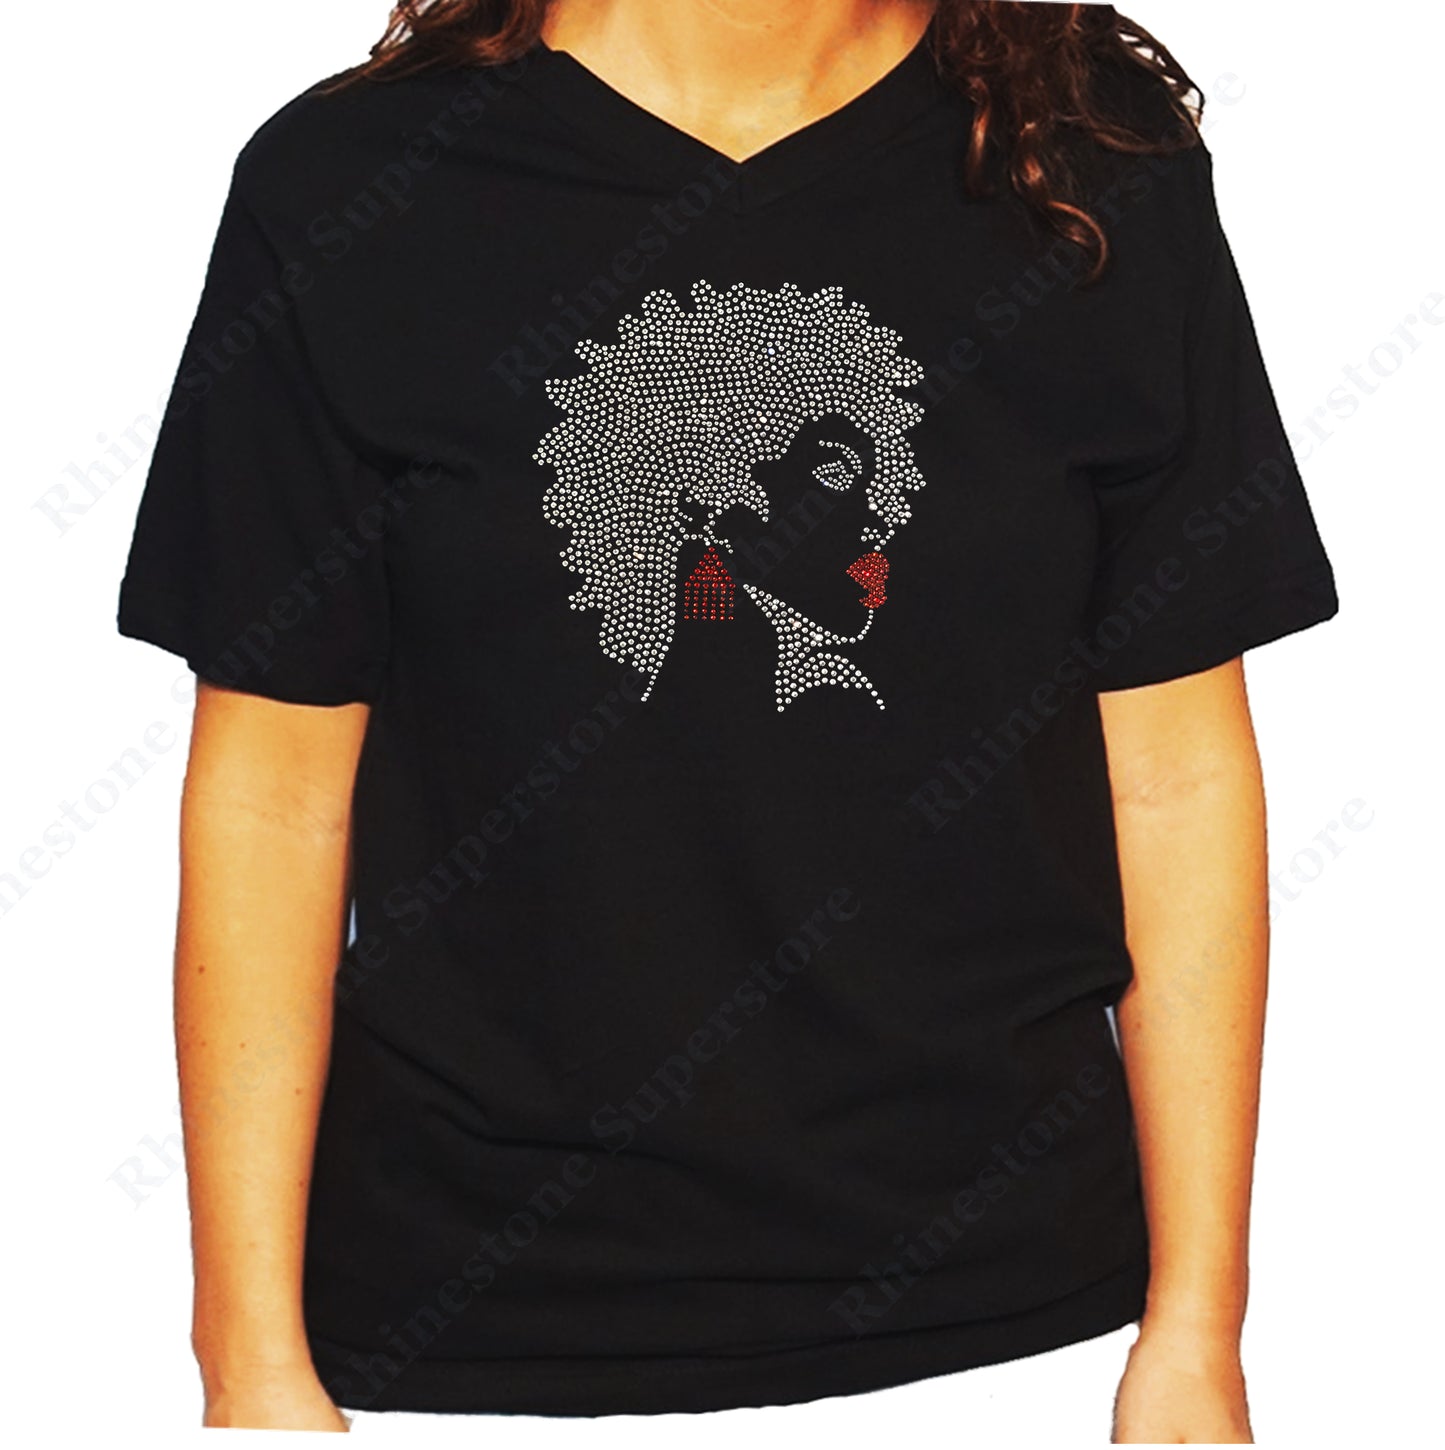 Women's / Unisex T-Shirt with Afro Girl with Red Earrings and Lipstick in Rhinestones